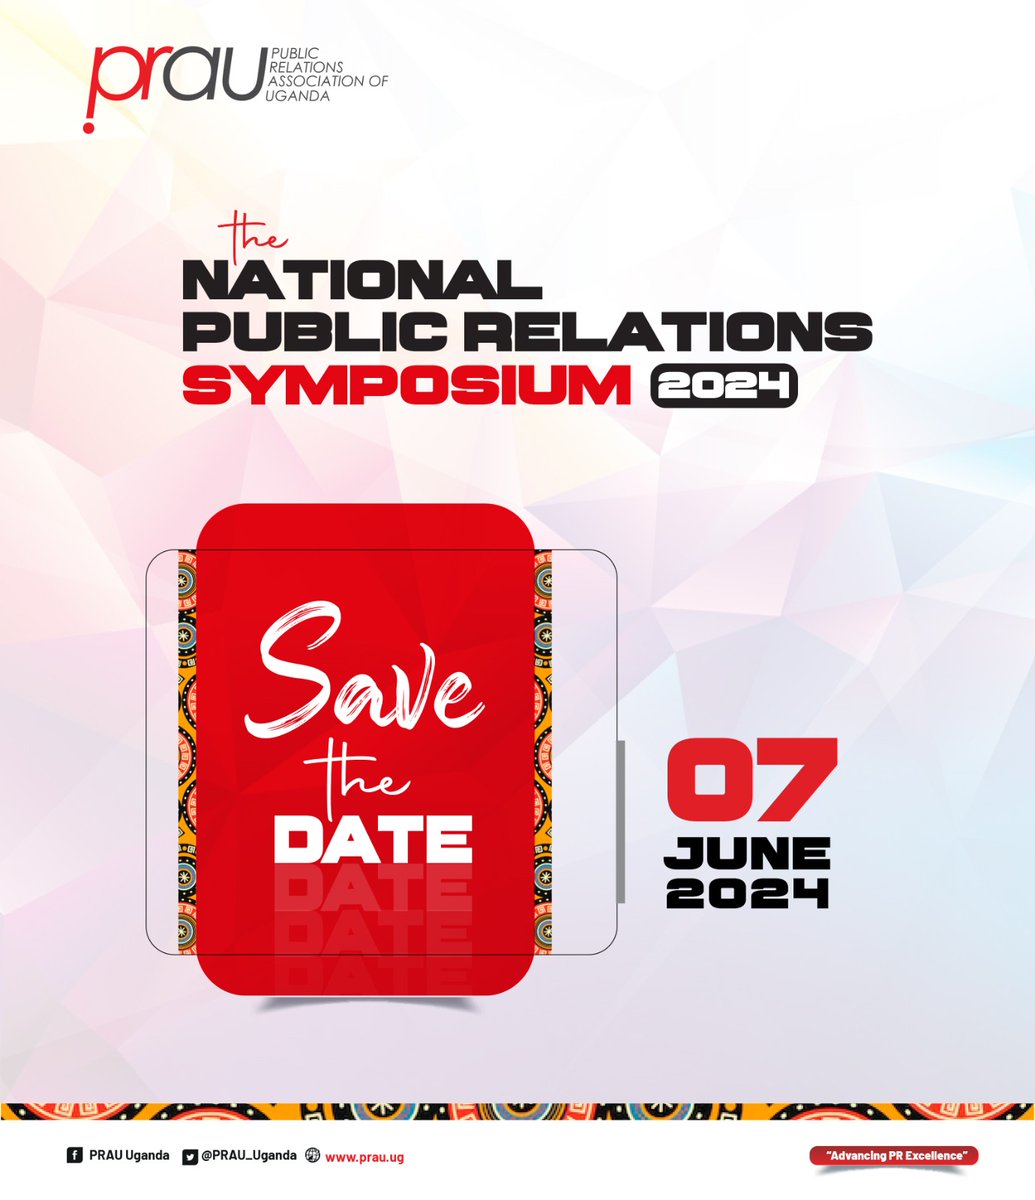 Exciting news! The PRAU National PR Symposium is just around the corner, and we're gearing up for an unforgettable event. #PRNS Stay tuned for more details regarding the agenda, speakers, and registration process coming your way soon.